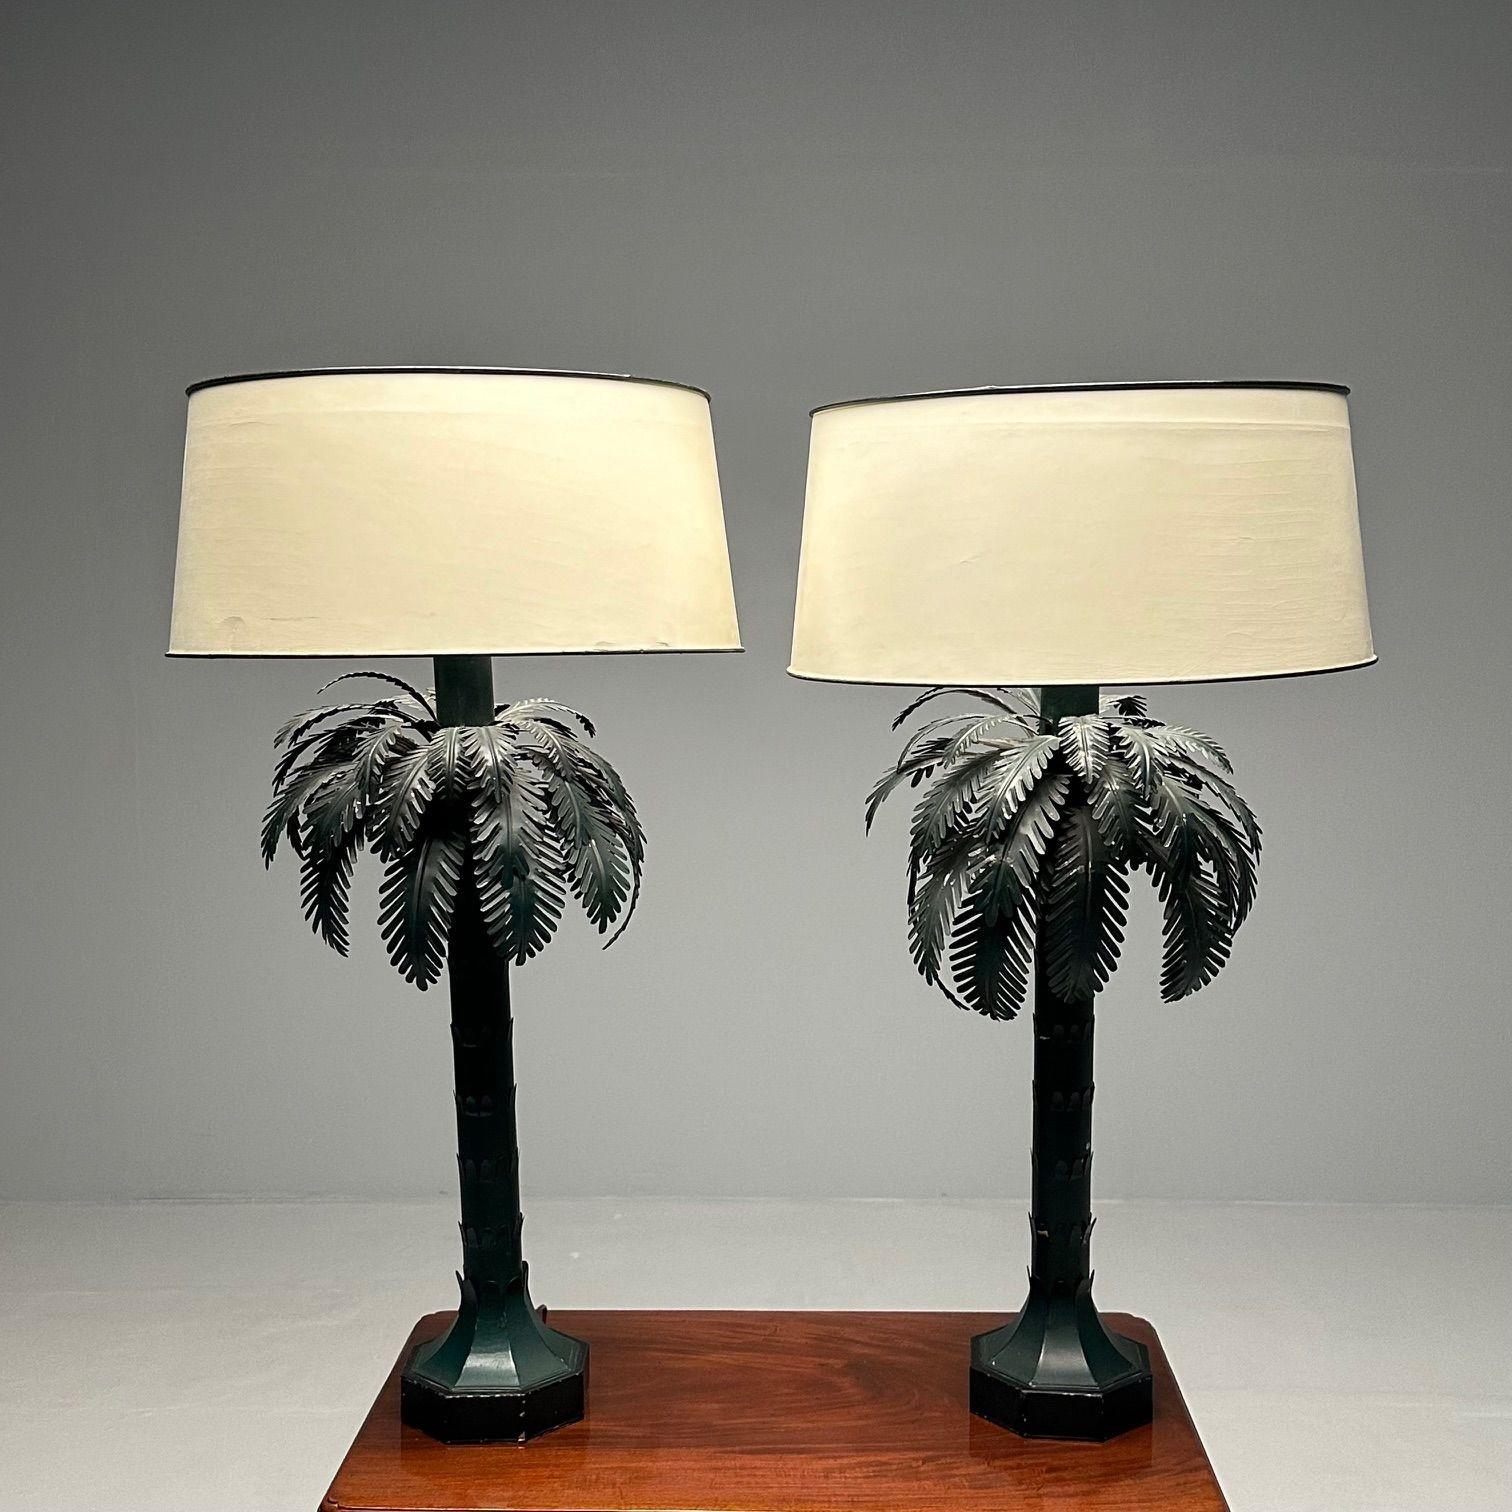 American Maison Jansen Style, Mid-Century Modern, Palm Tree Lamps, Green, Metal, 1970s For Sale